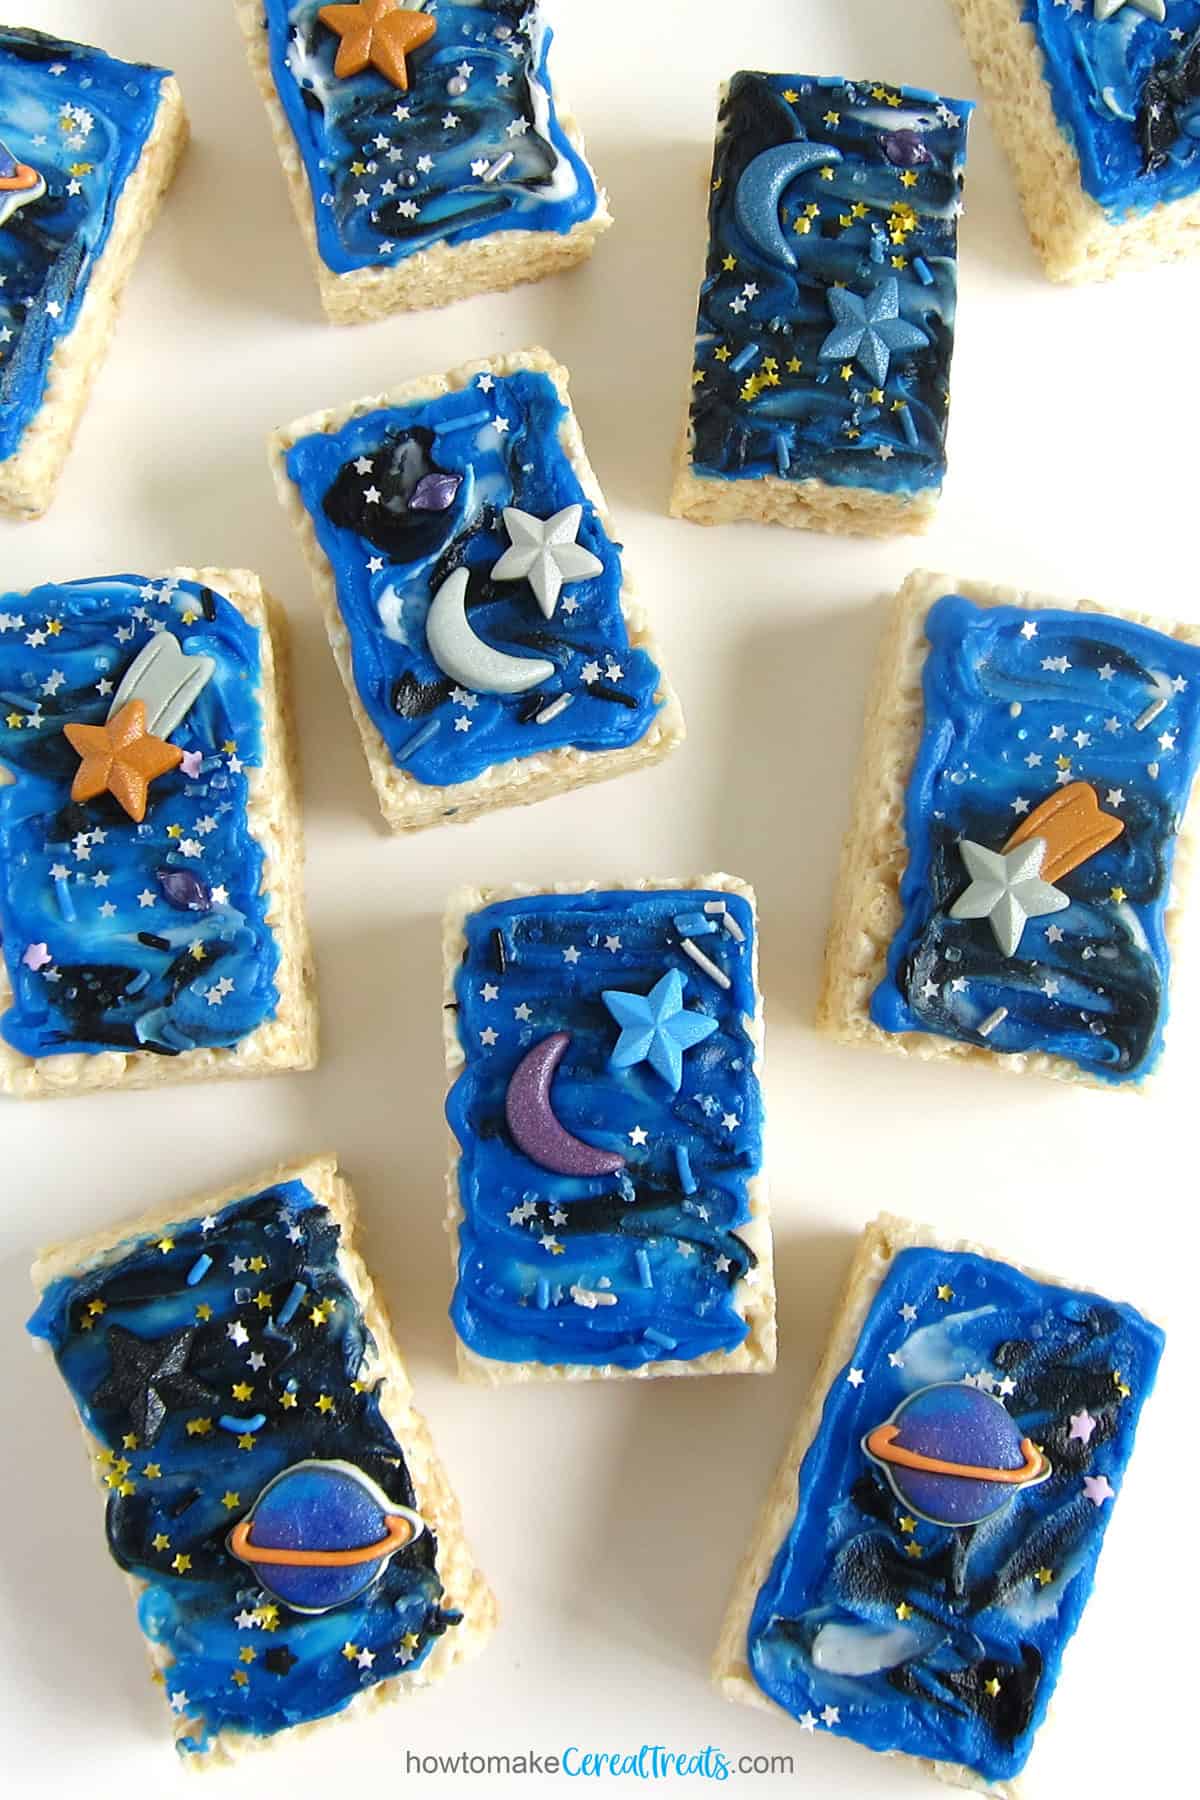 Galaxy Rice Krispie Treats topped with frosting, sprinkles, glitter stars, and icing decorations